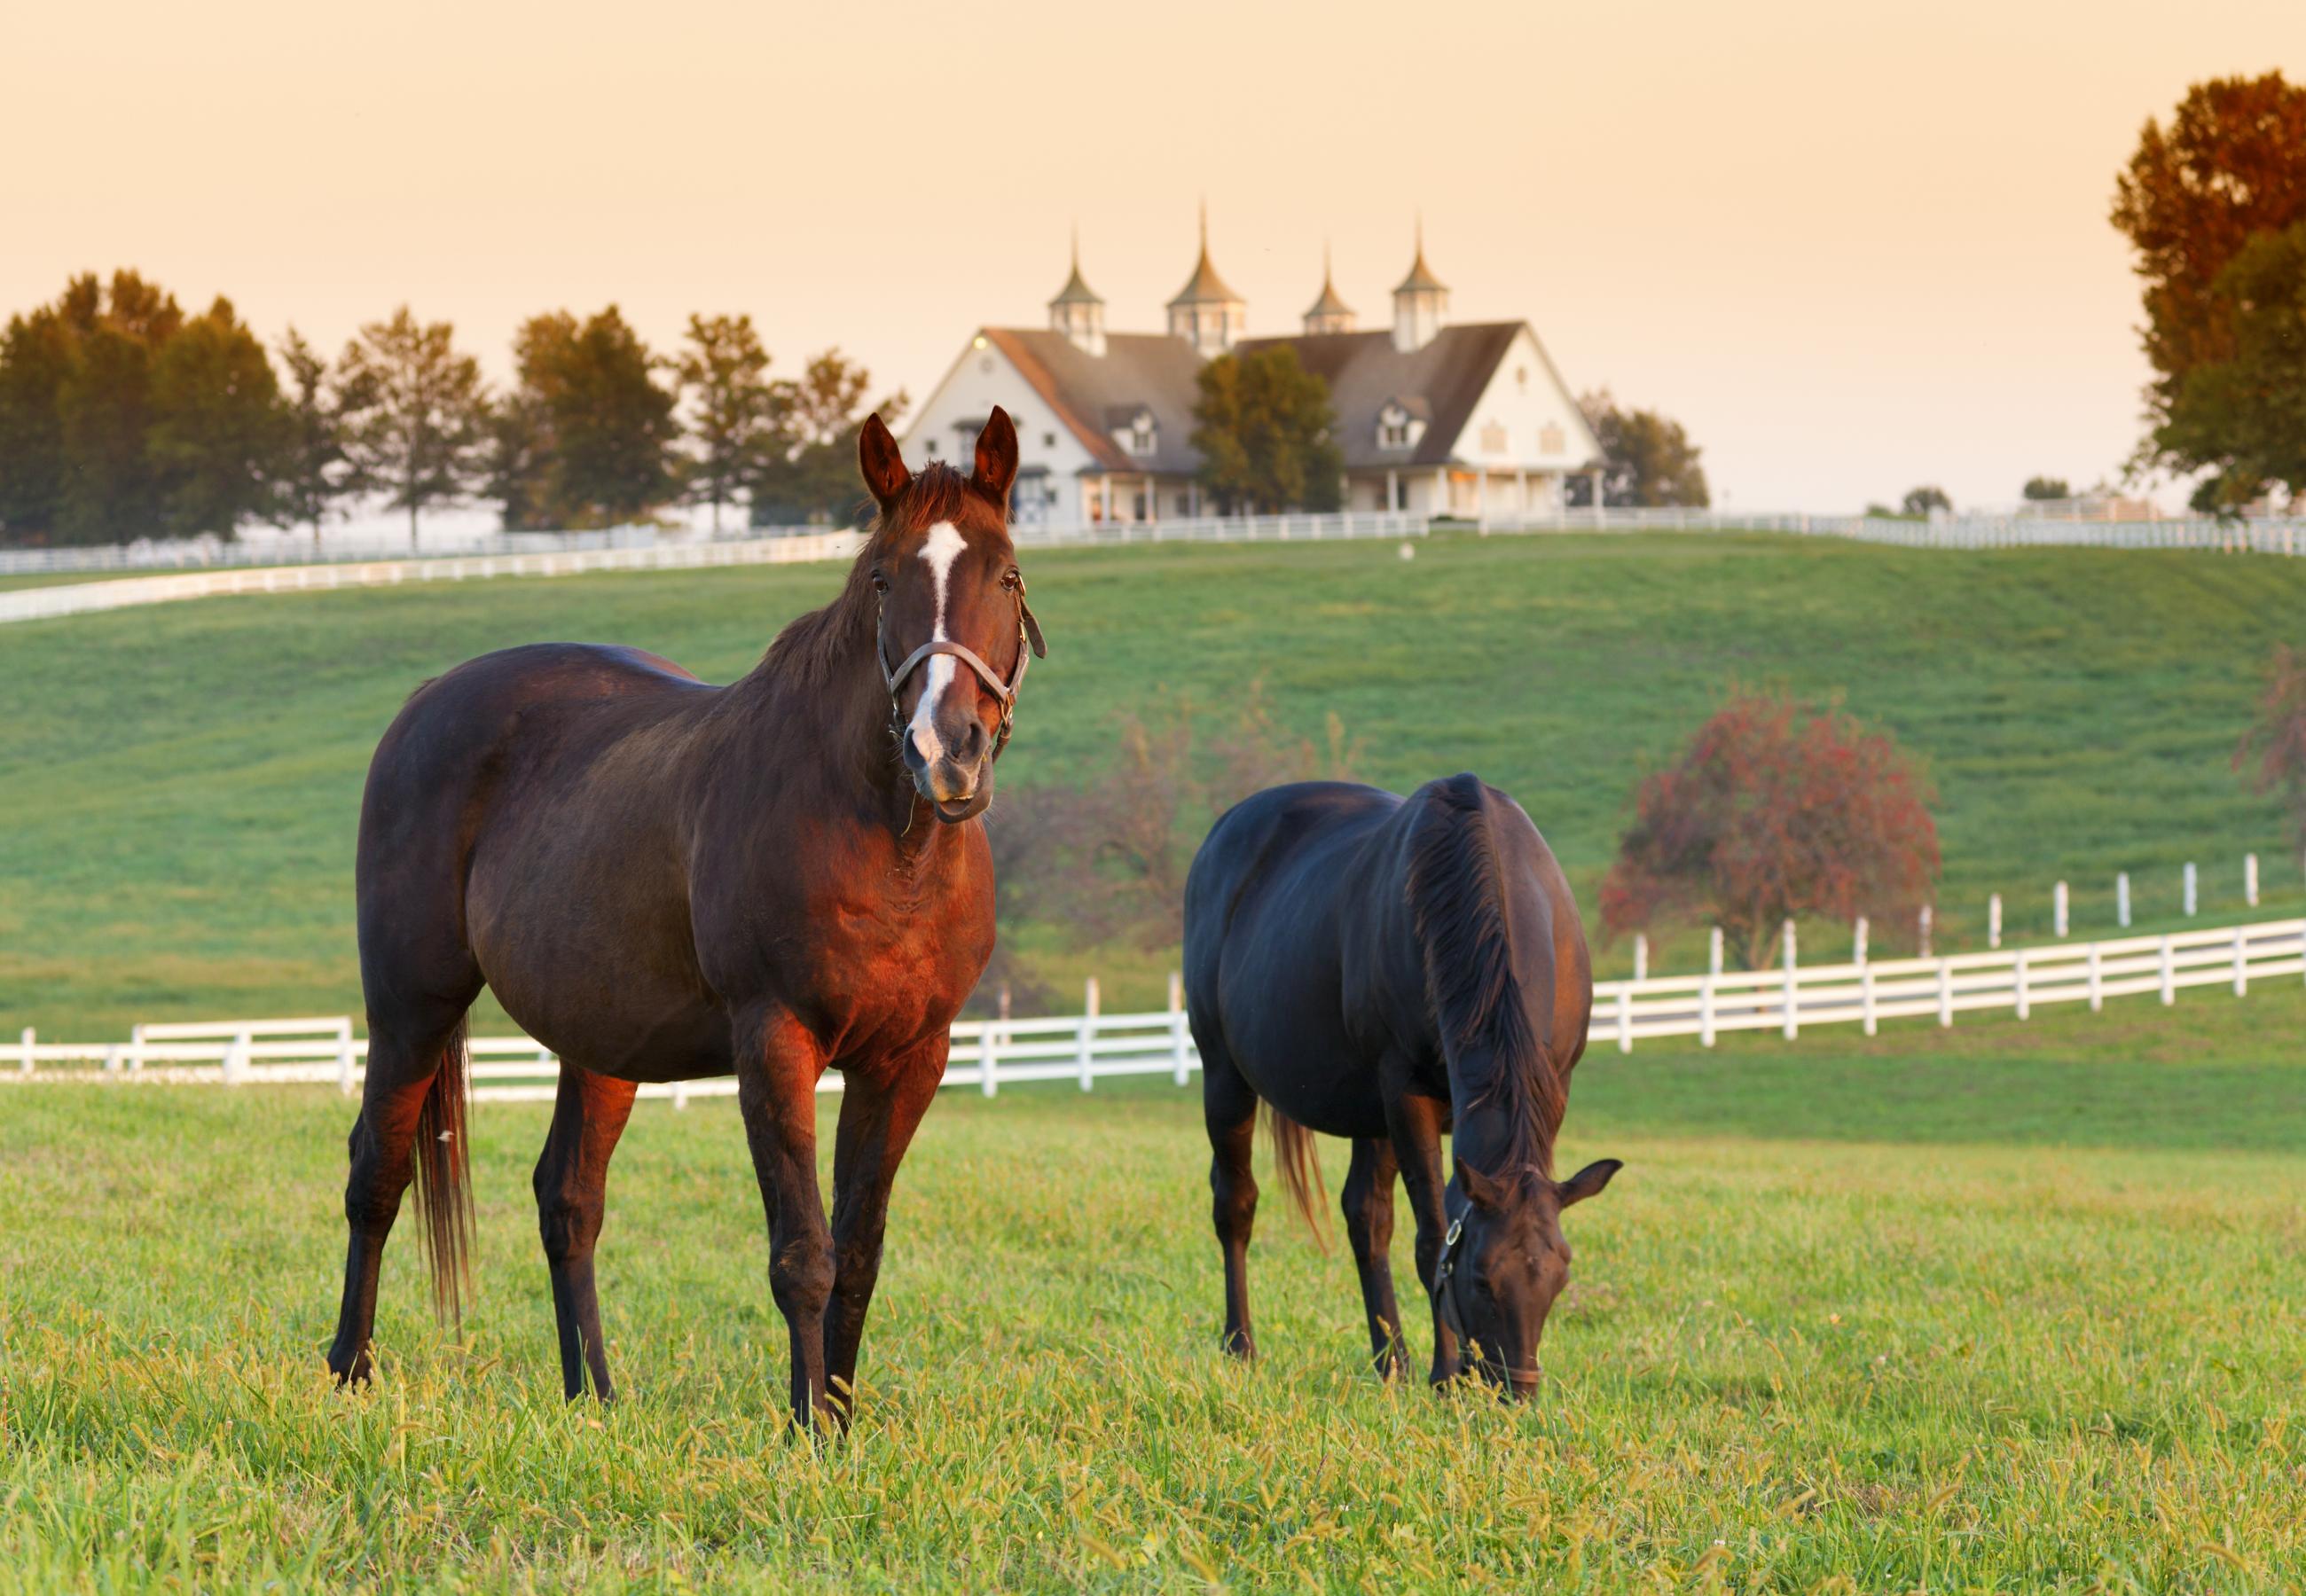 Two horses in a field with a large farmhouse in the background